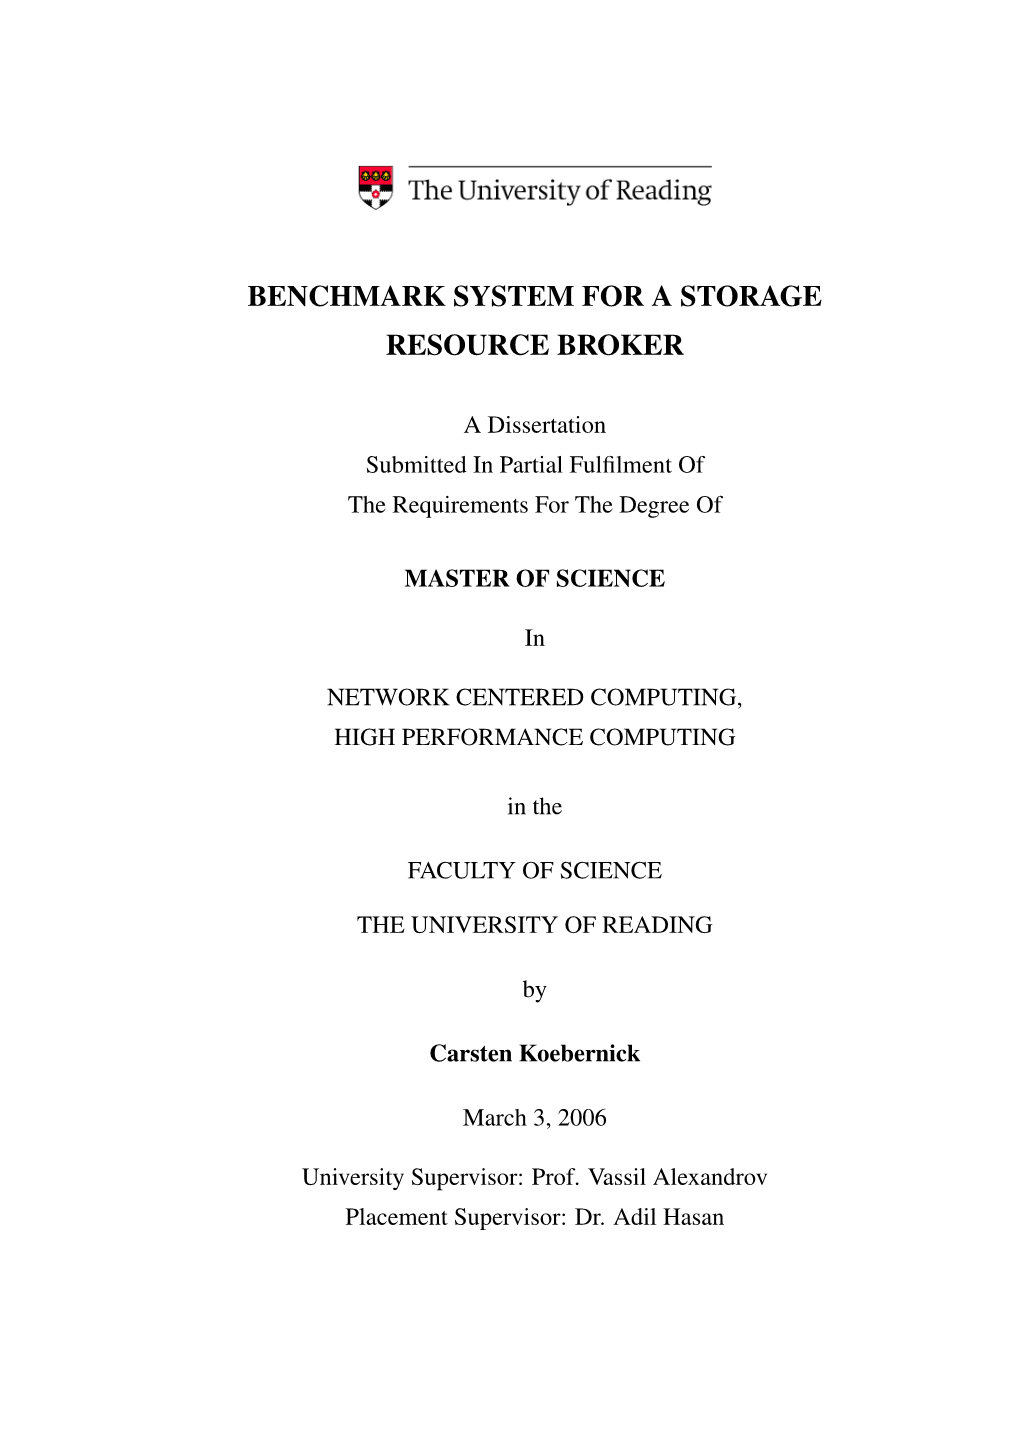 Benchmark System for a Storage Resource Broker